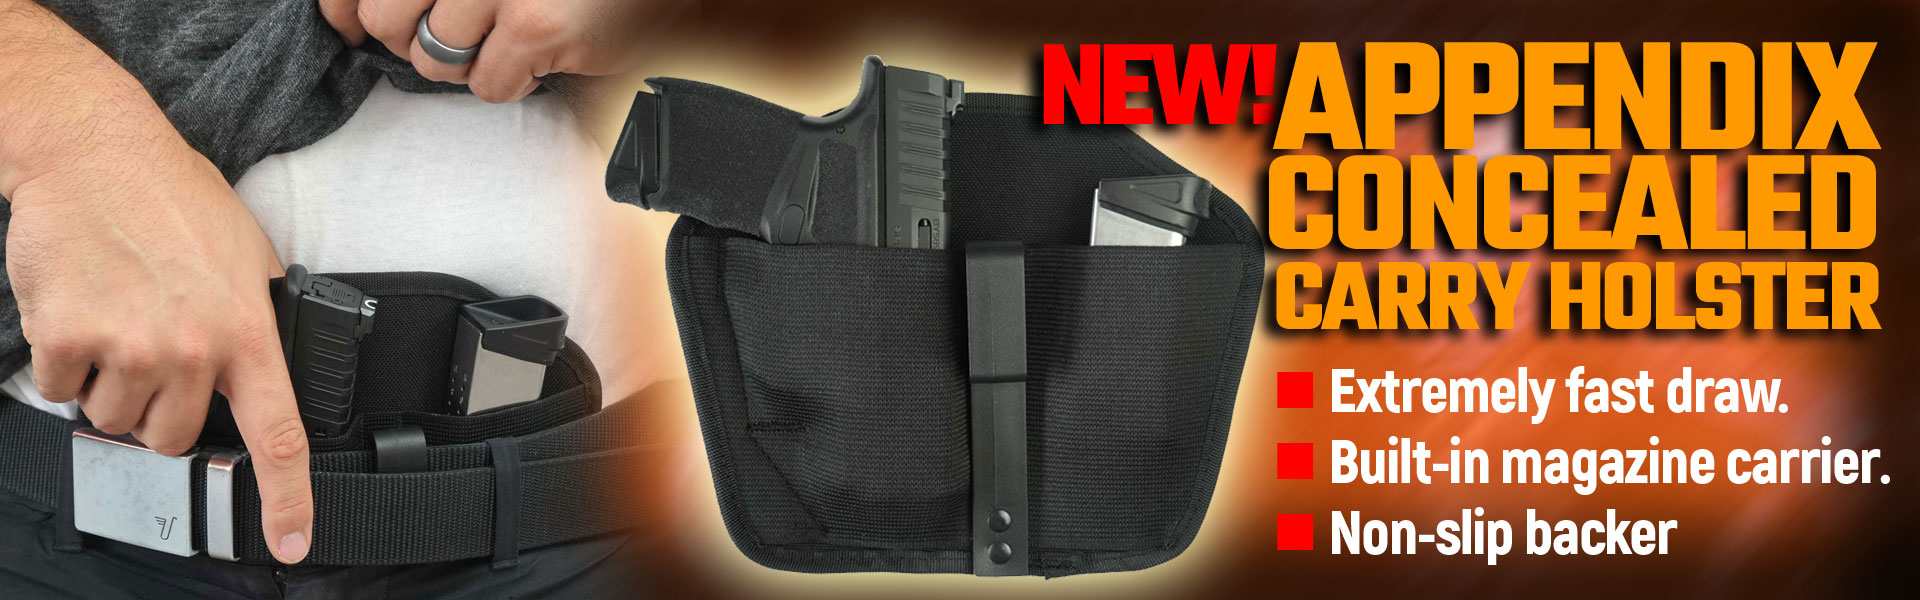 Appendix Concealed Carry Holster